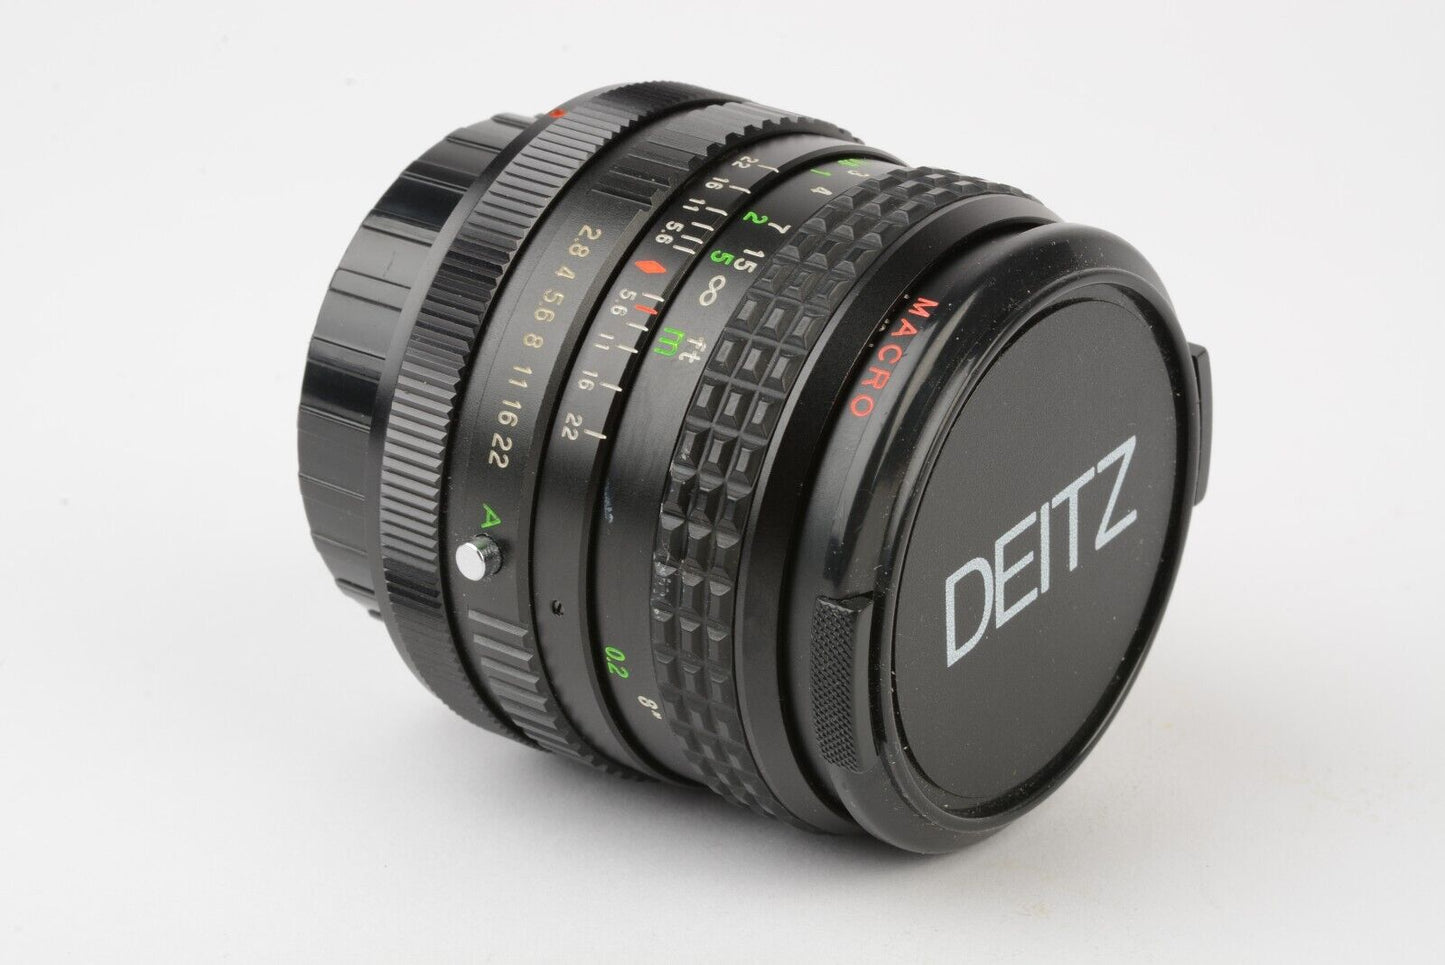 EXC++ DEITZ FOR CANON FD 28mm F2.8 WIDE ANGLE LENS, CAPS, NICE WIDE & MACRO LENS